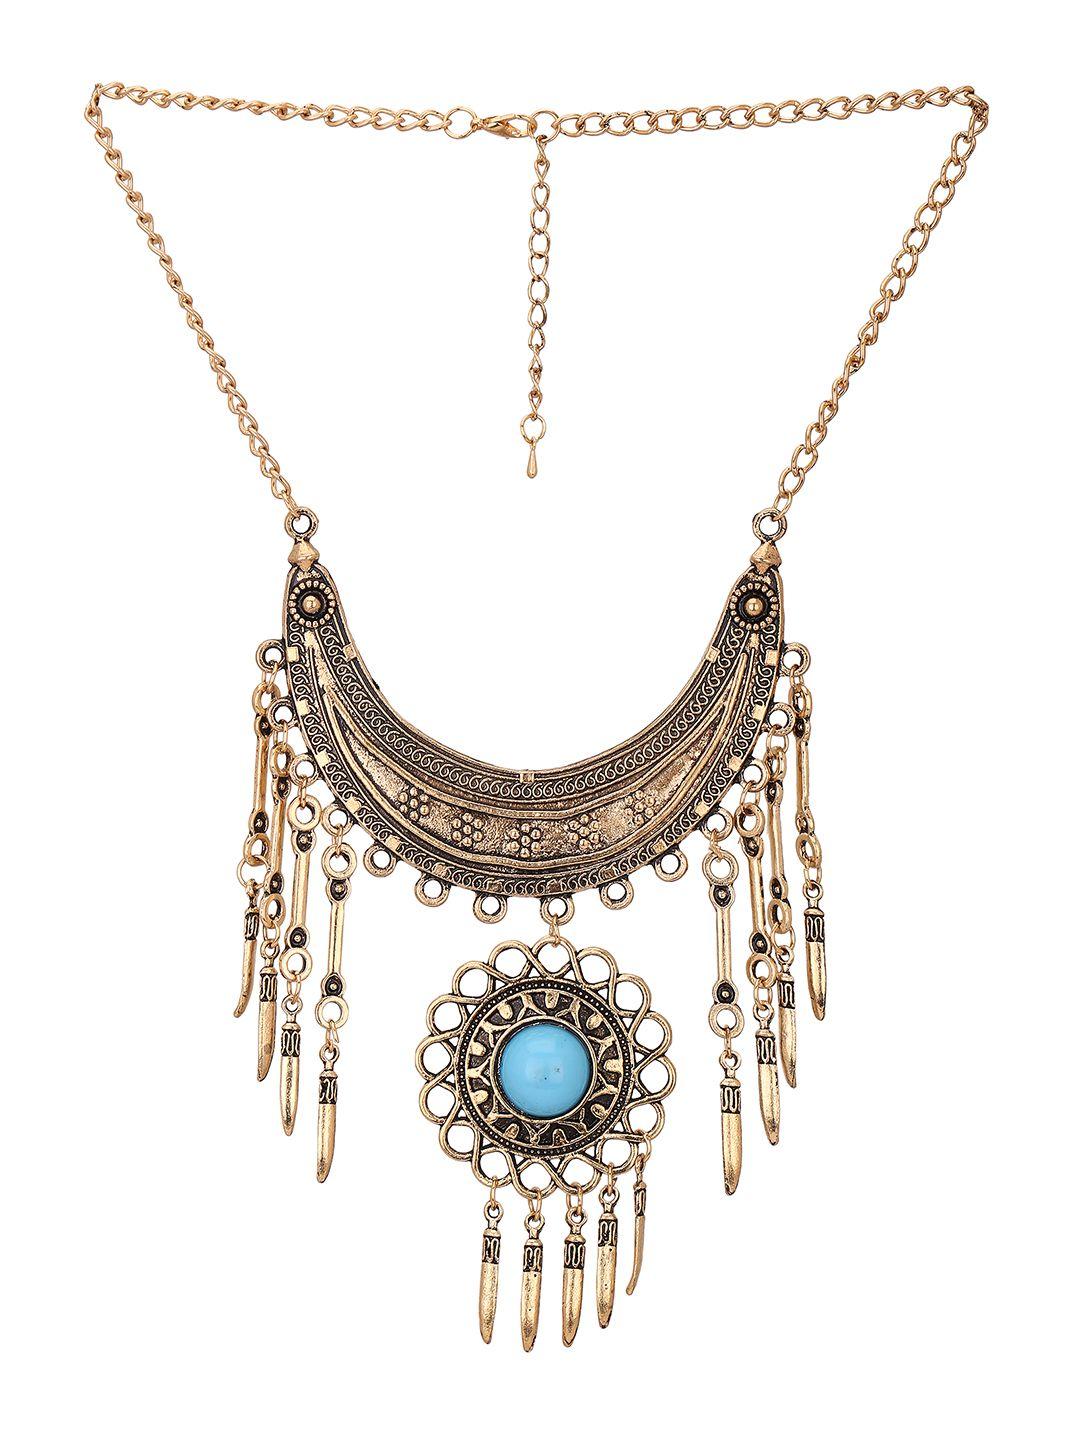 adwitiya collection silver-plated antique gold-toned oxidised necklace